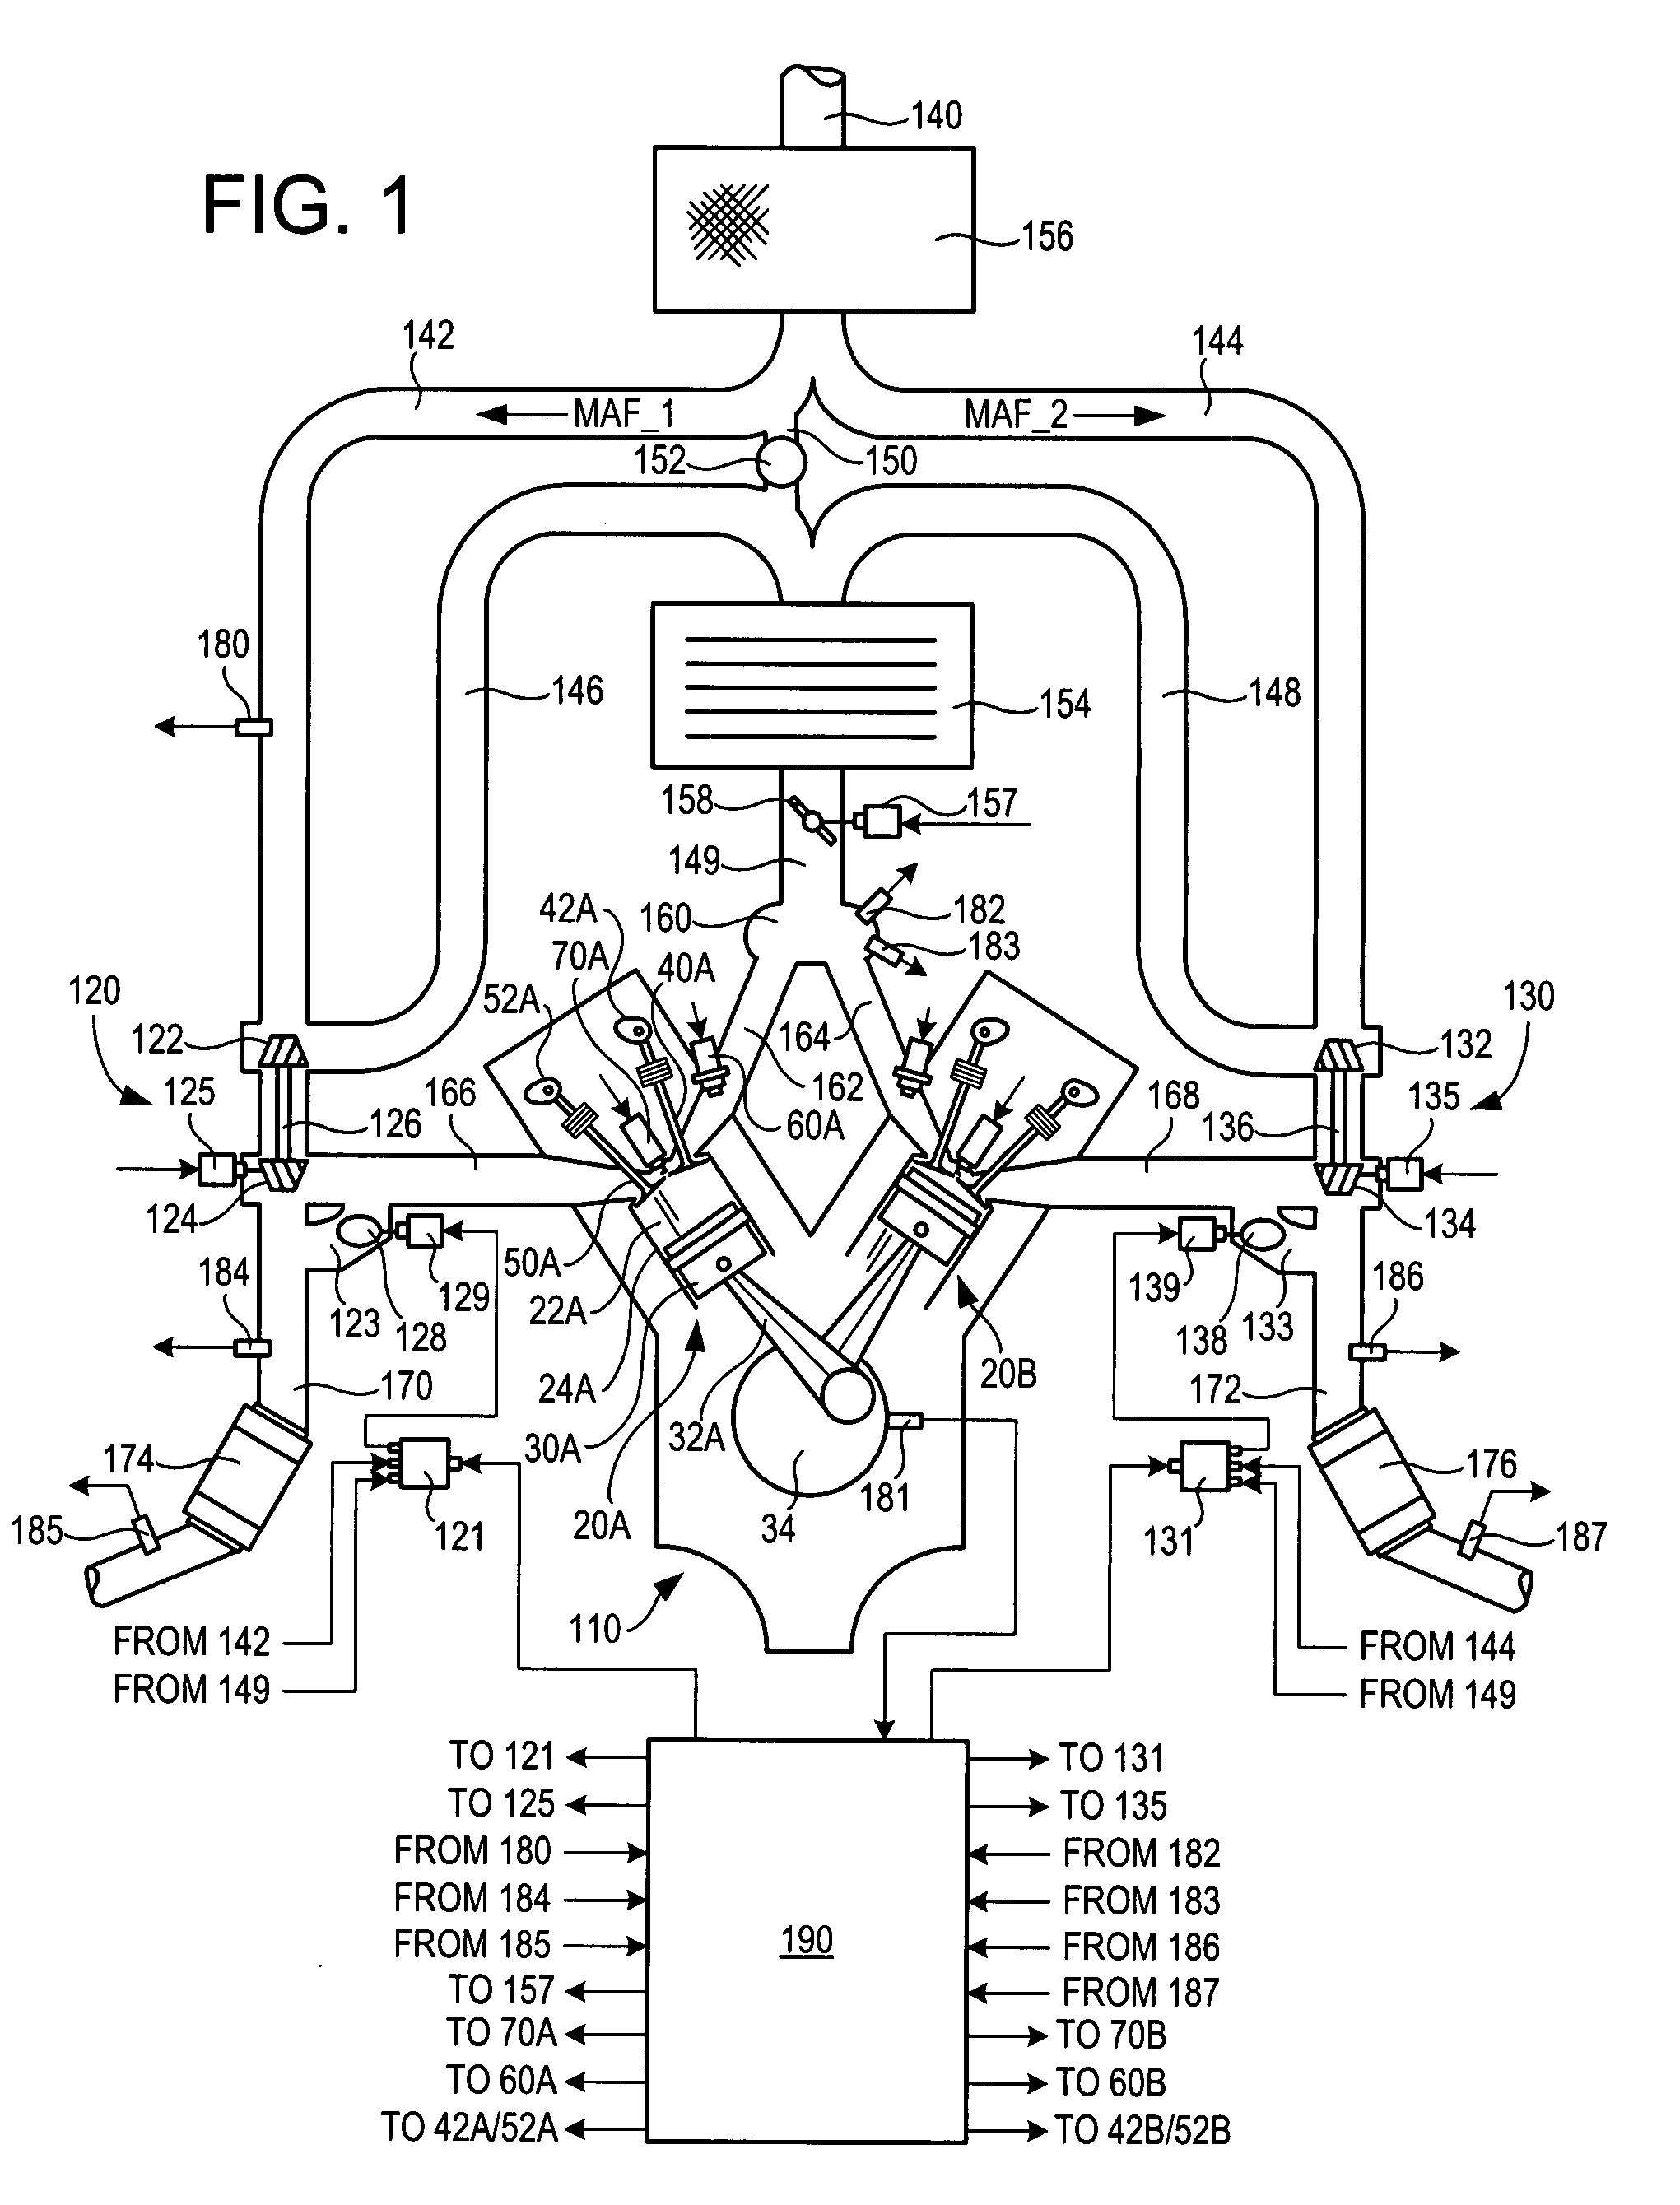 Airflow Balance for a Twin Turbocharged Engine System